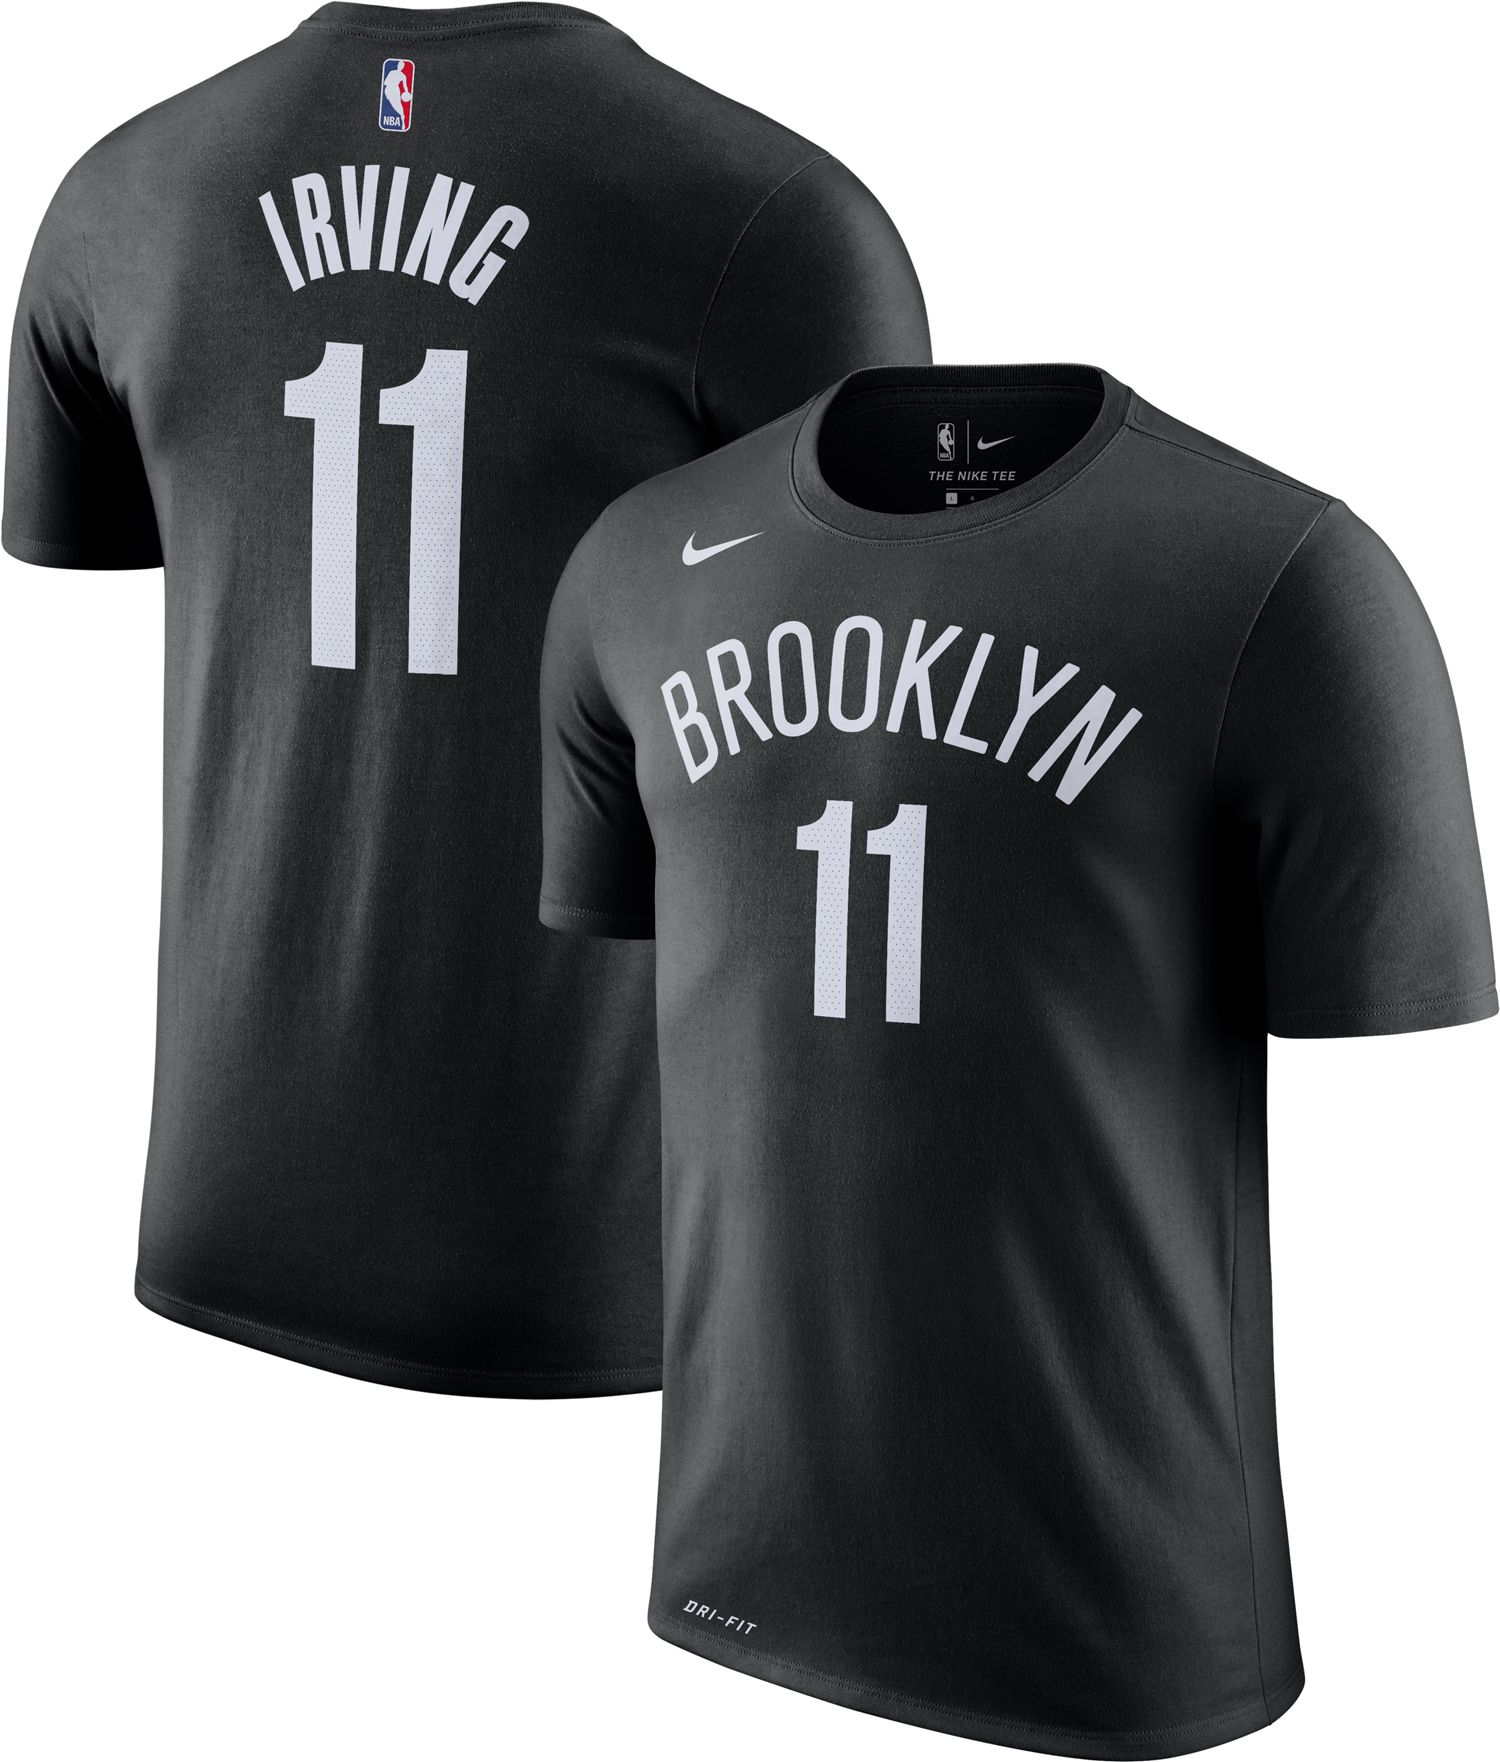 Nike Youth Brooklyn Nets Kyrie Irving 